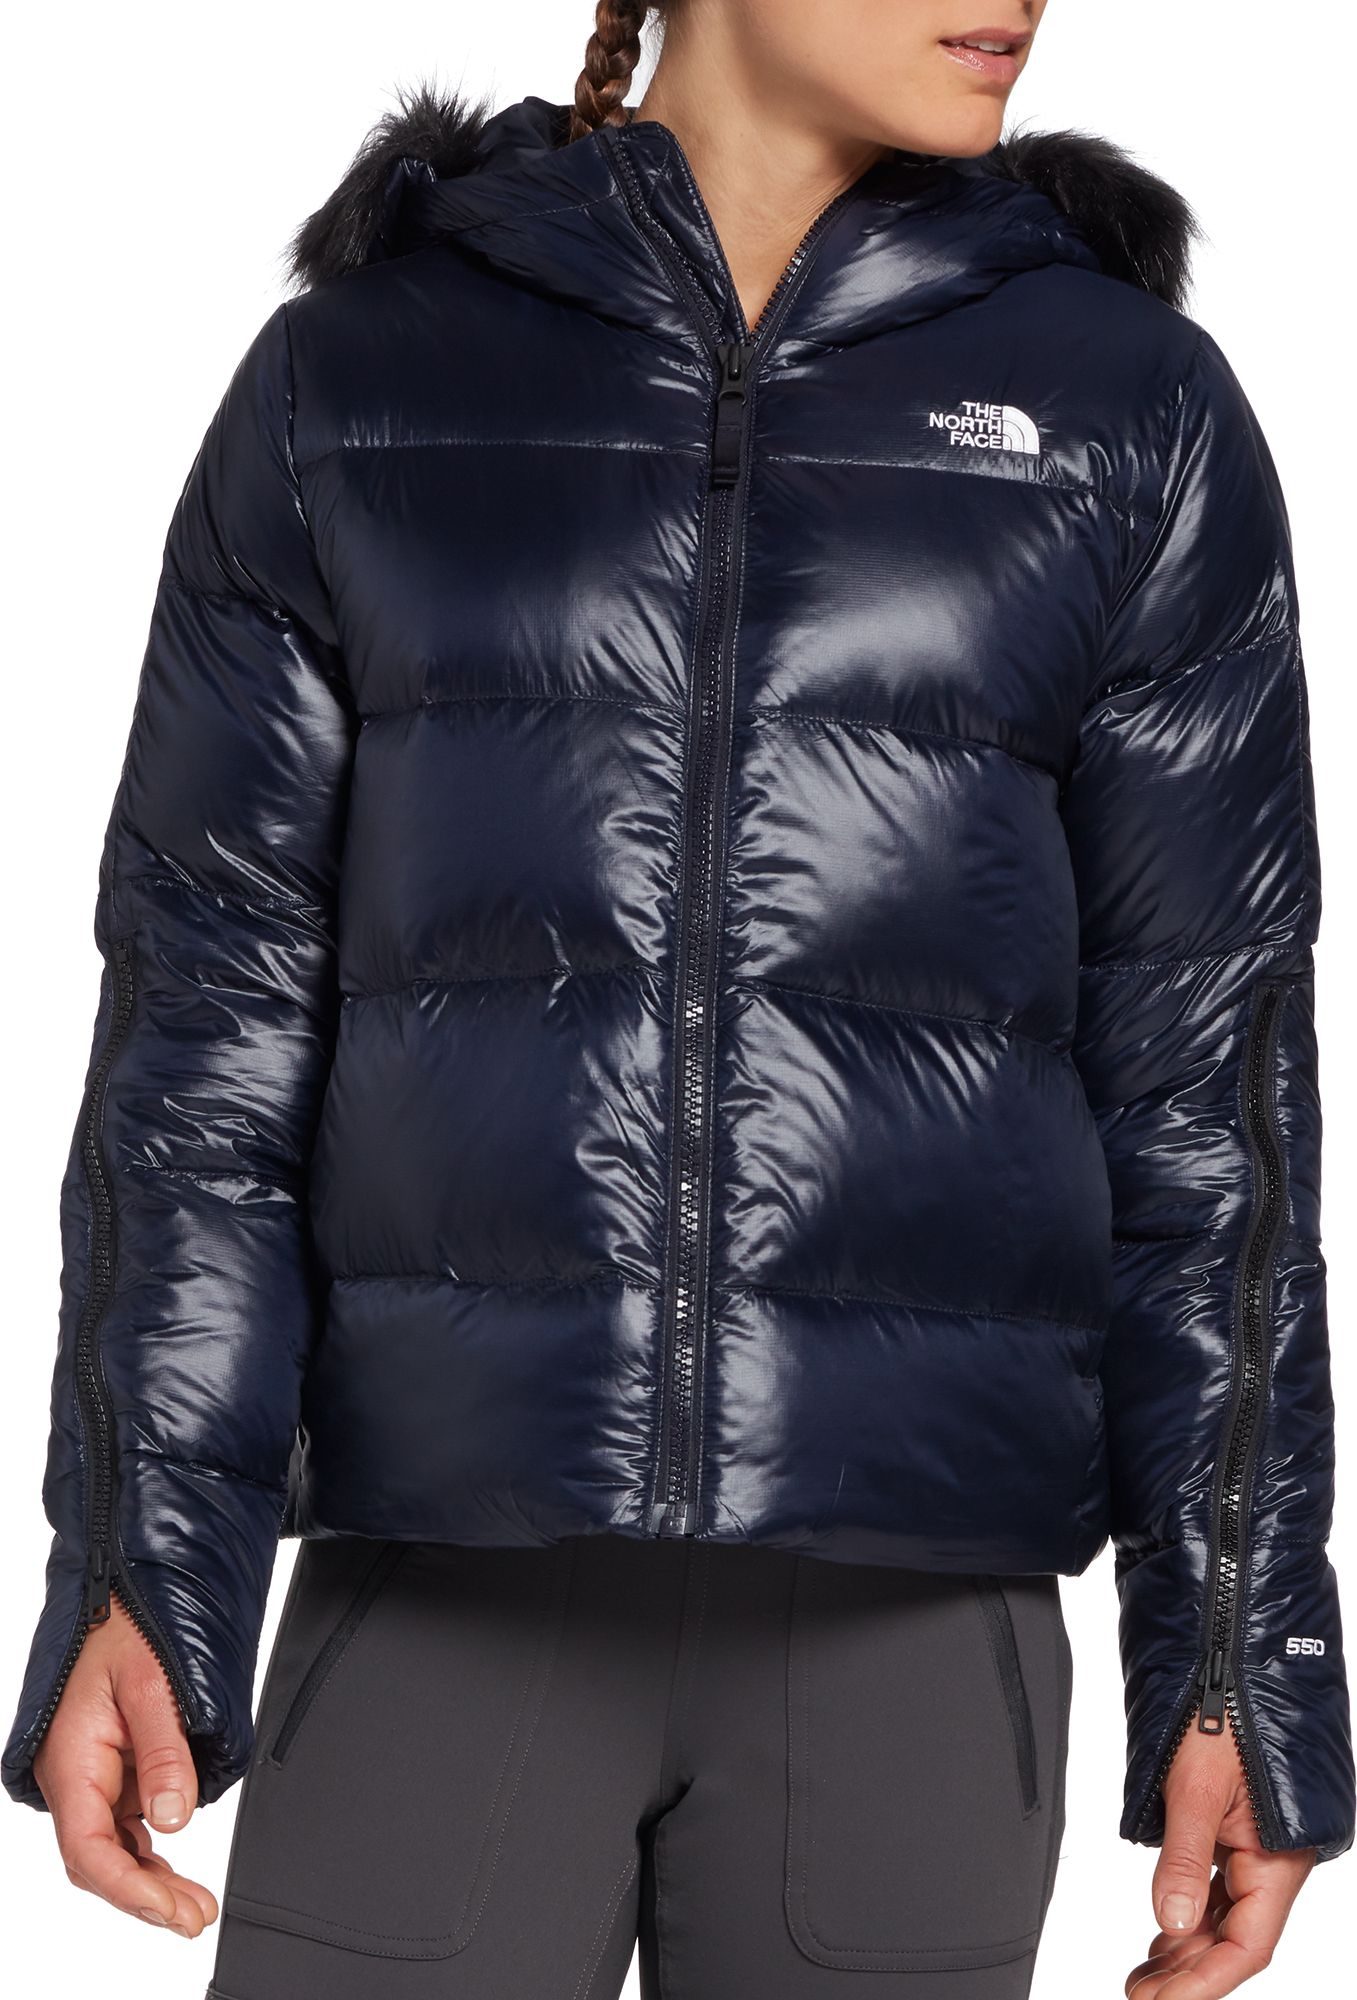 north face products near me